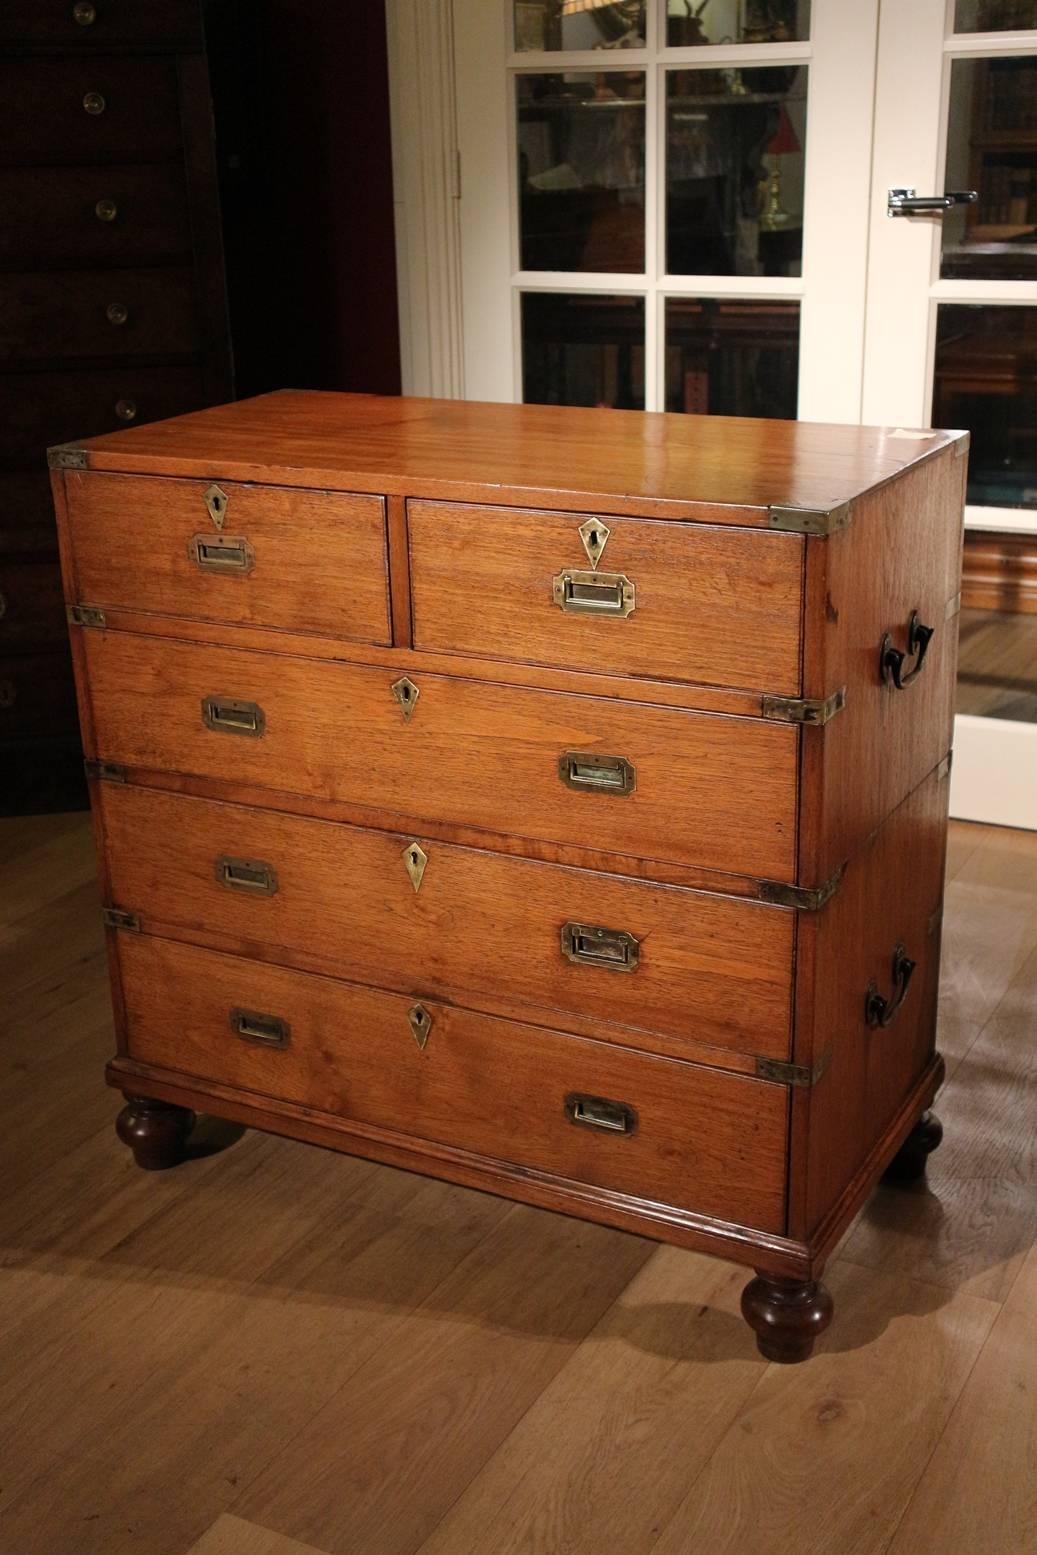 Here we have a fine small military chest. The chest is made in two sections for the ease of transportation, either by sea or pack horse and mule.
This particular chest would have been made for an officer for Campaign.
The chest of drawers has the